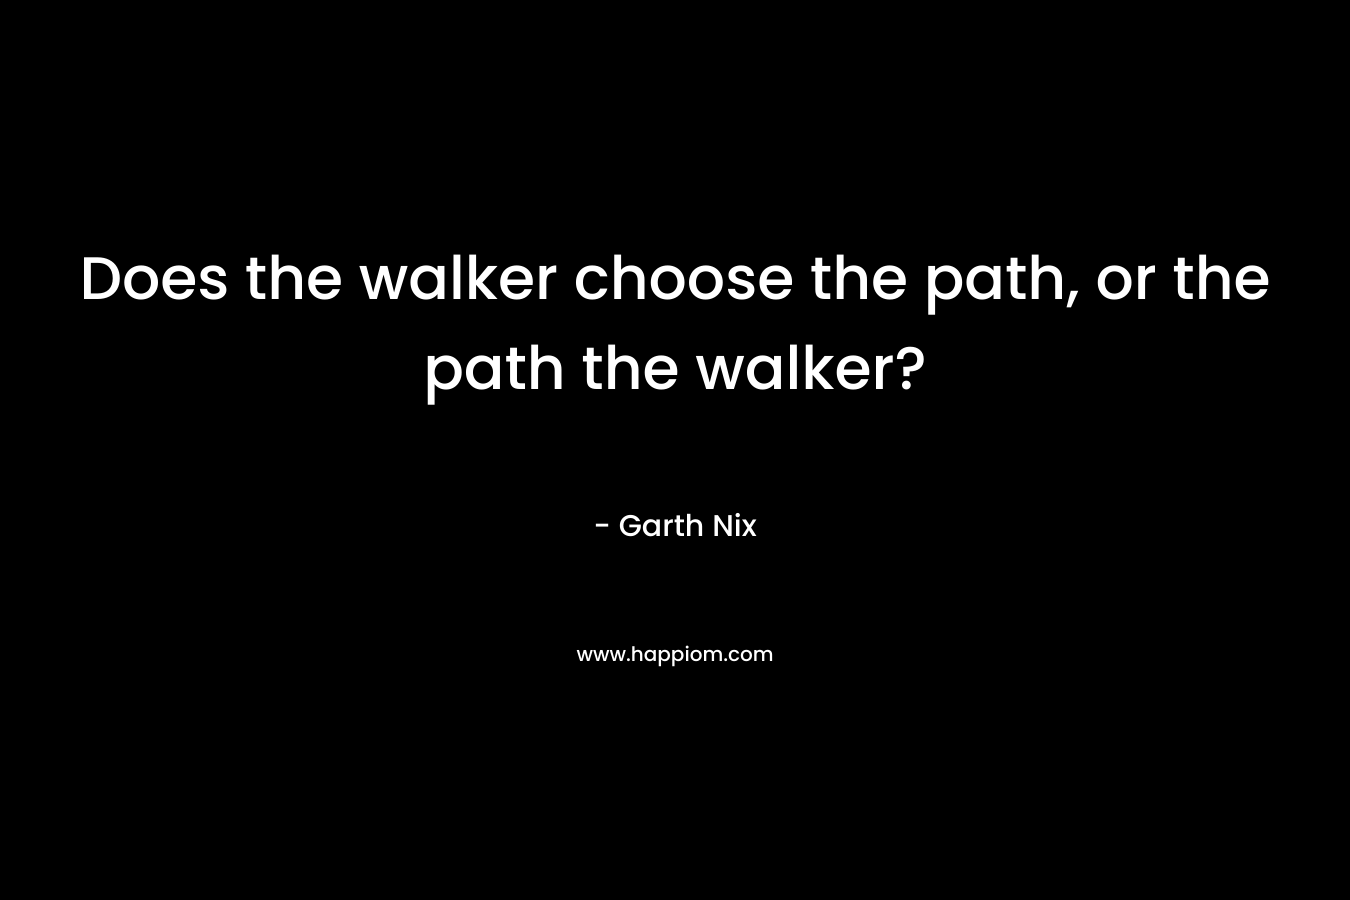 Does the walker choose the path, or the path the walker?